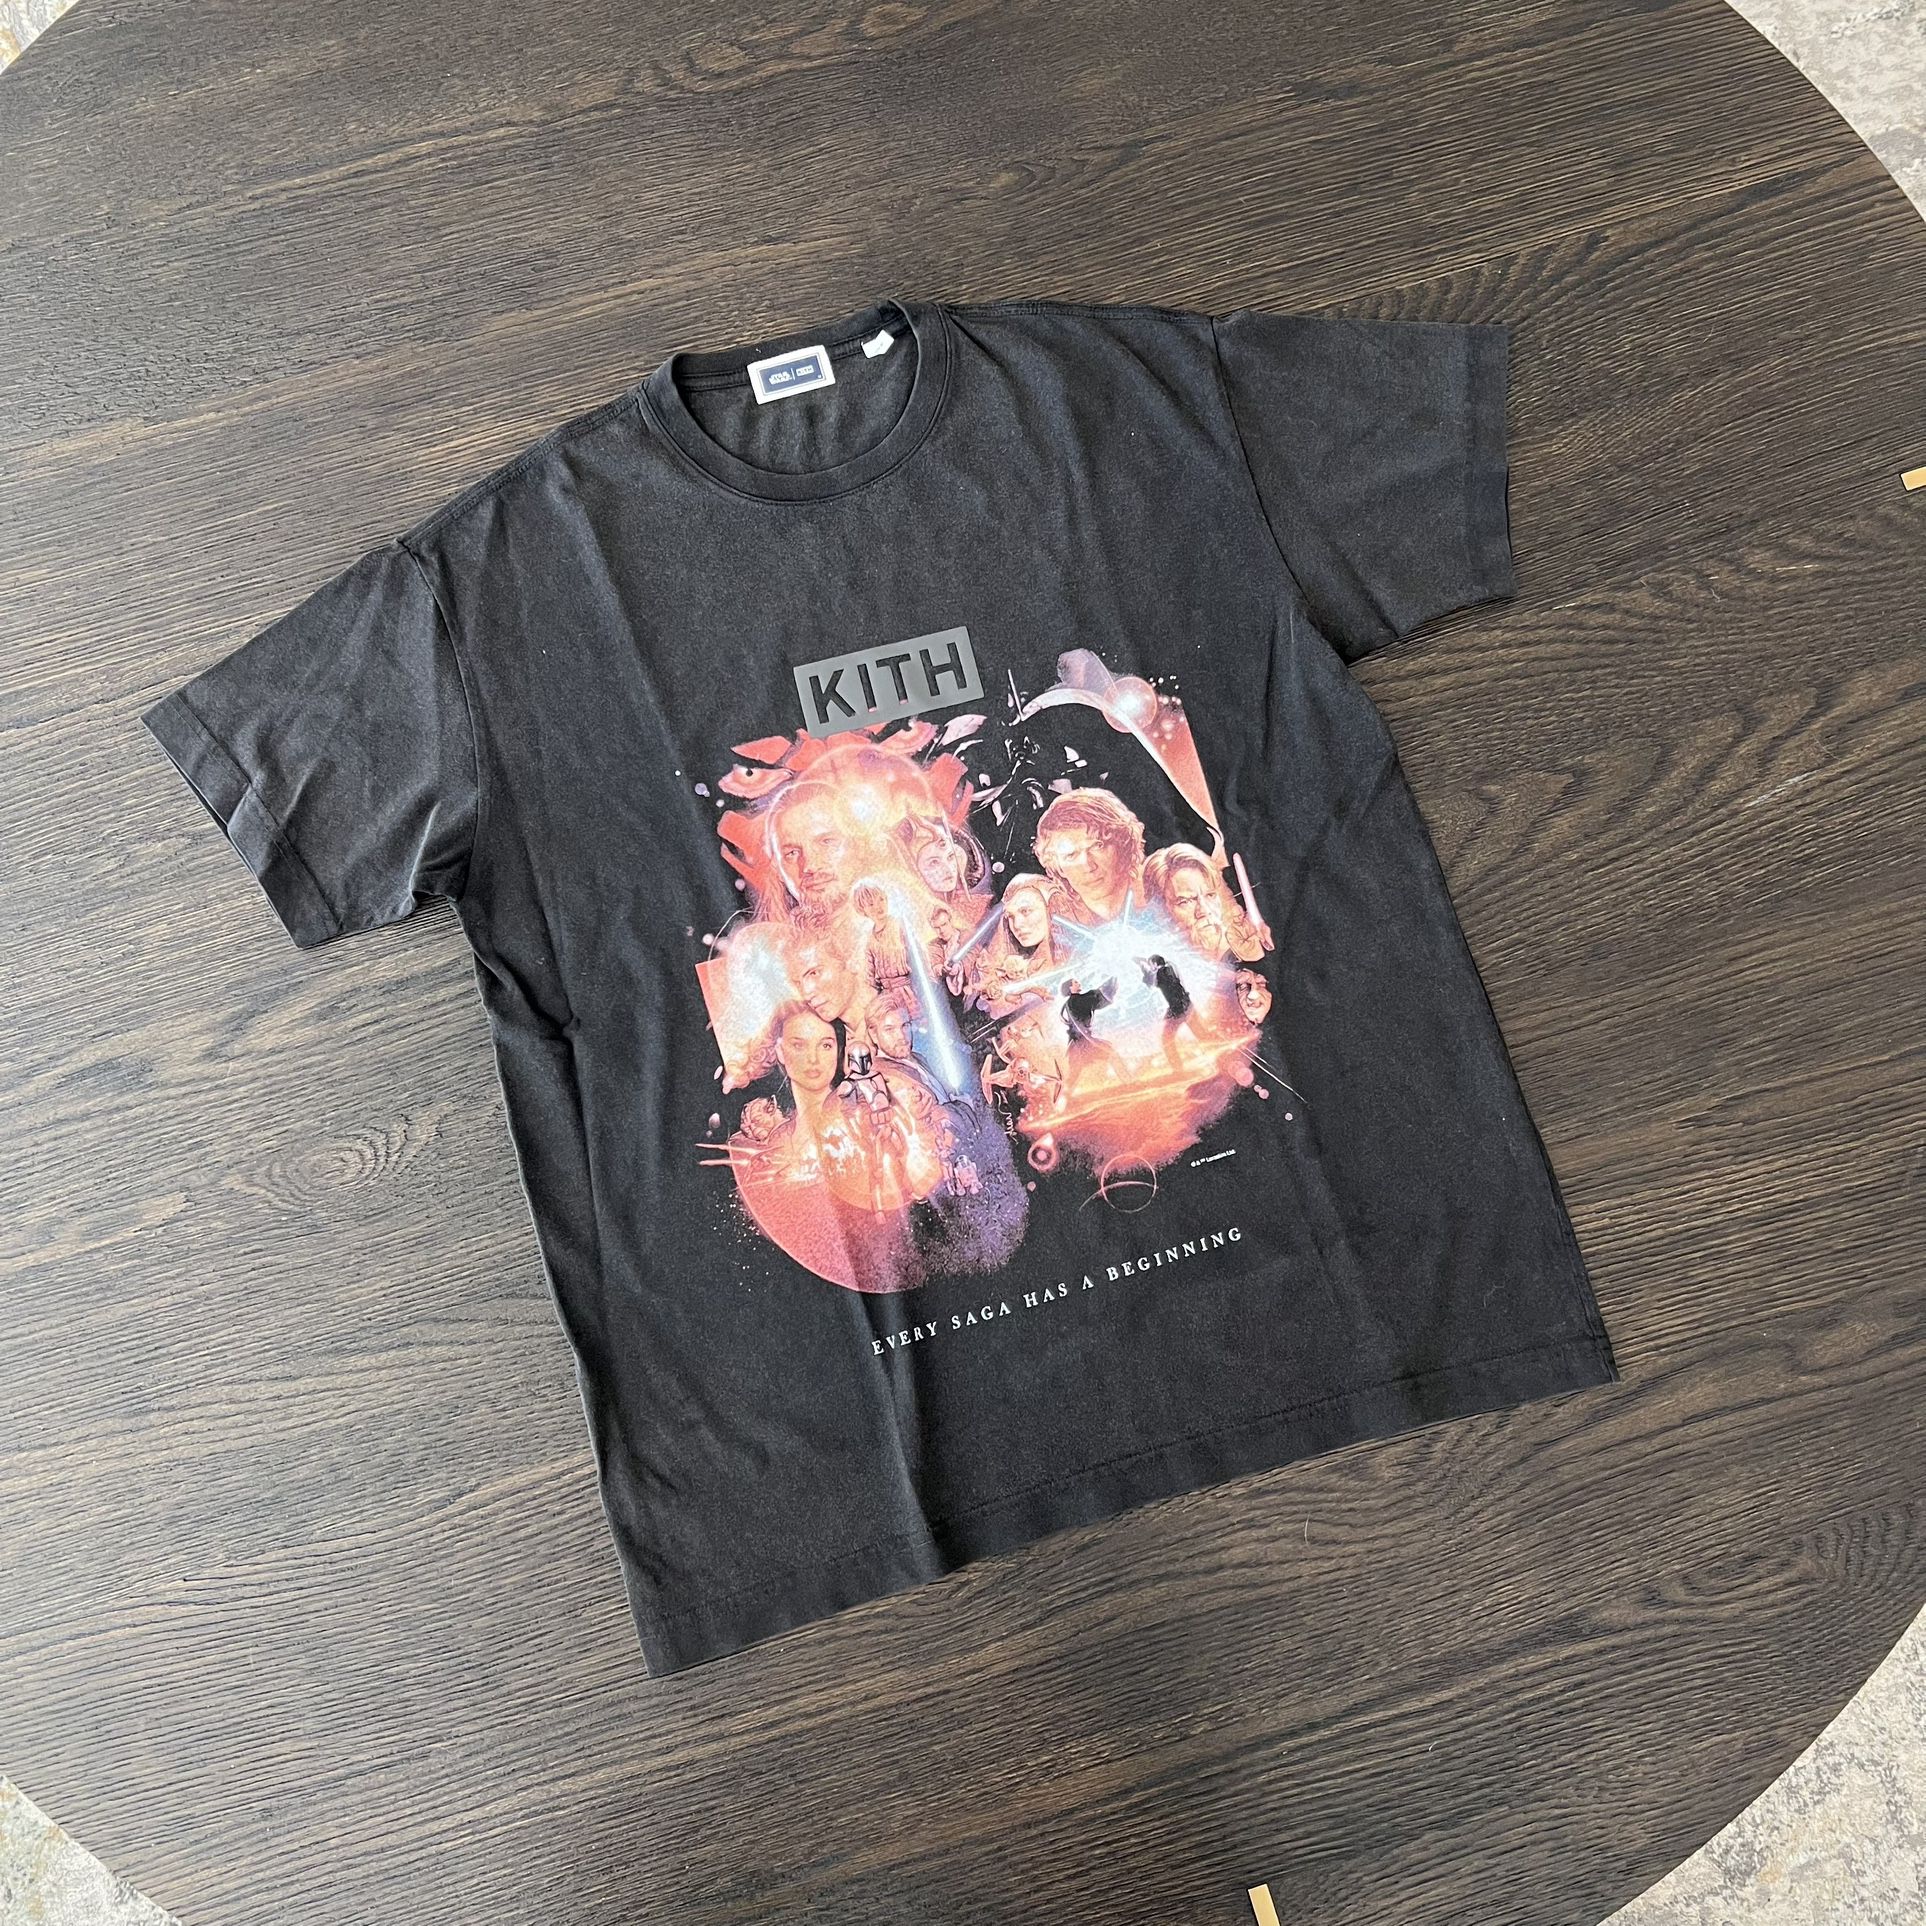 Size M - Kith x Star Wars Beginning Vintage Tee Black for Sale in 